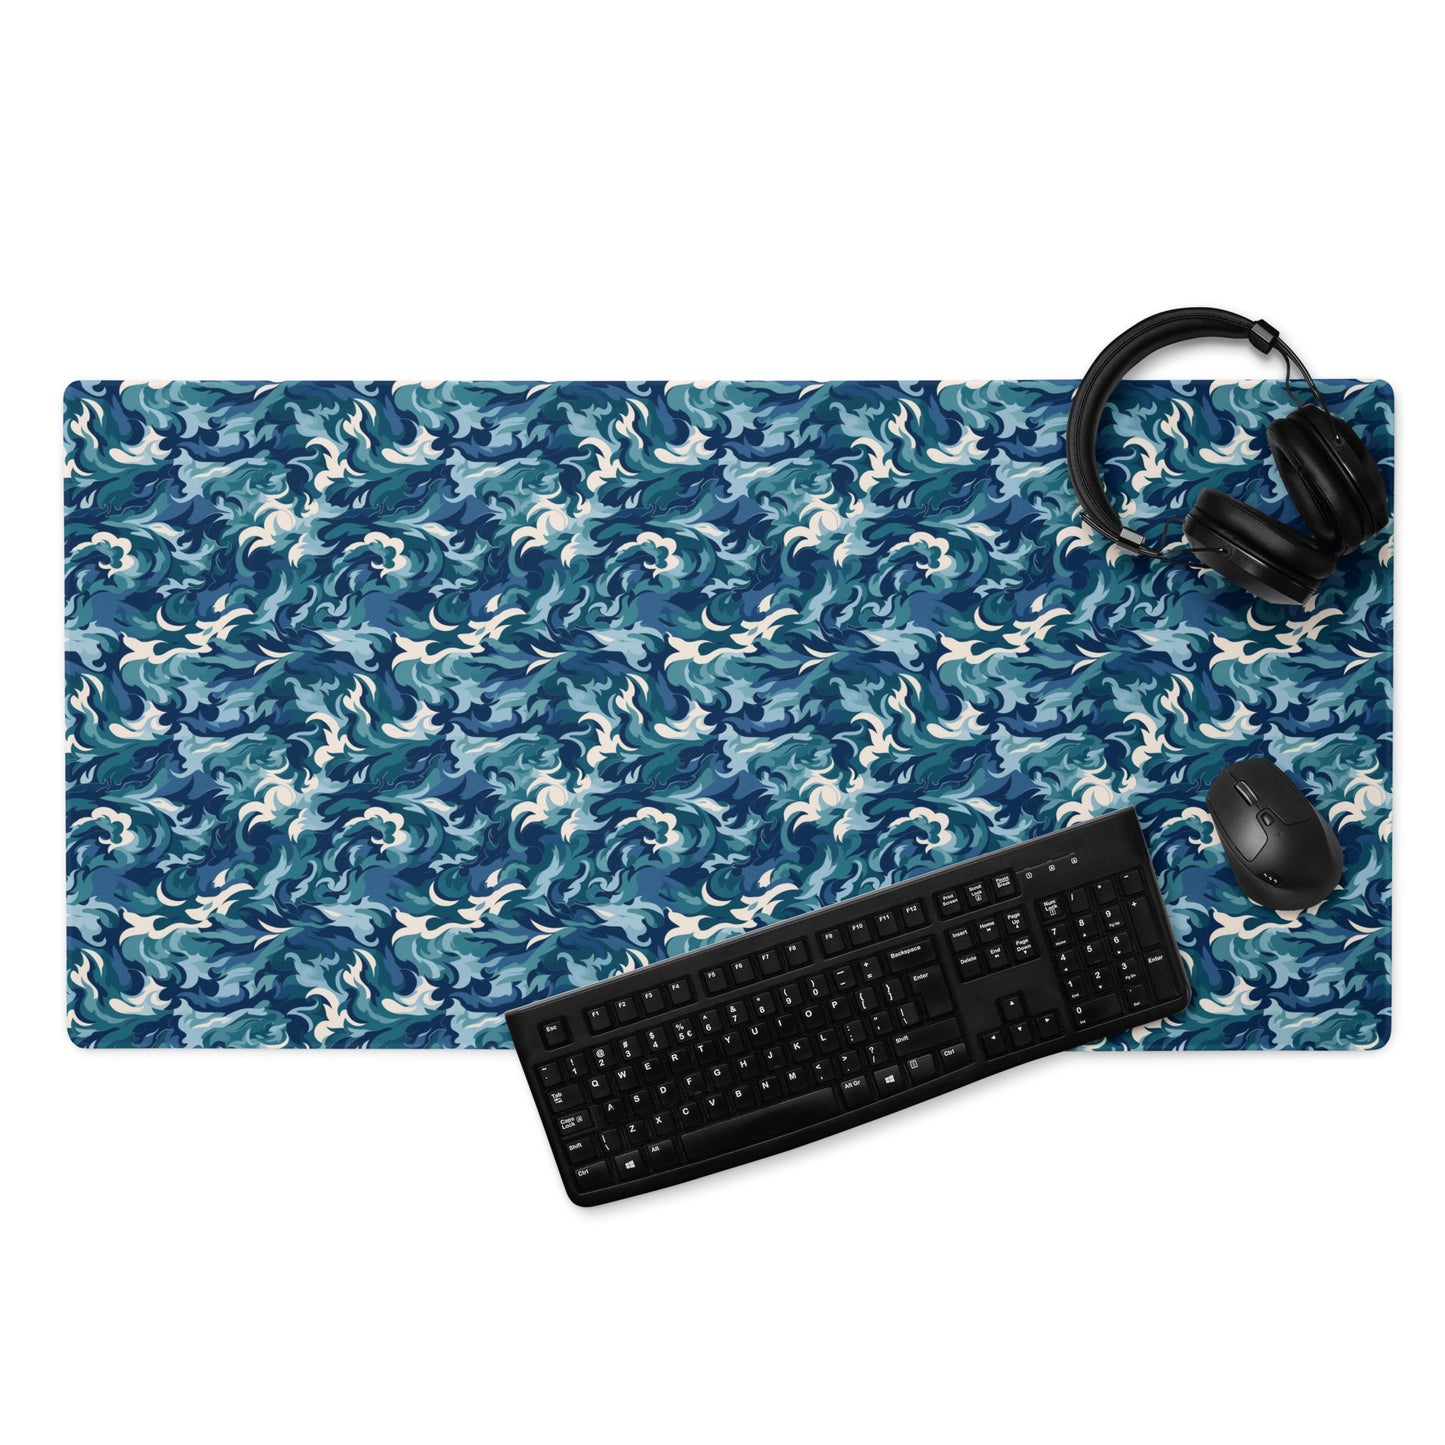 A 36" x 18" desk pad with a teal and white camo pattern. With a keyboard, mouse, and headphones sitting on it.